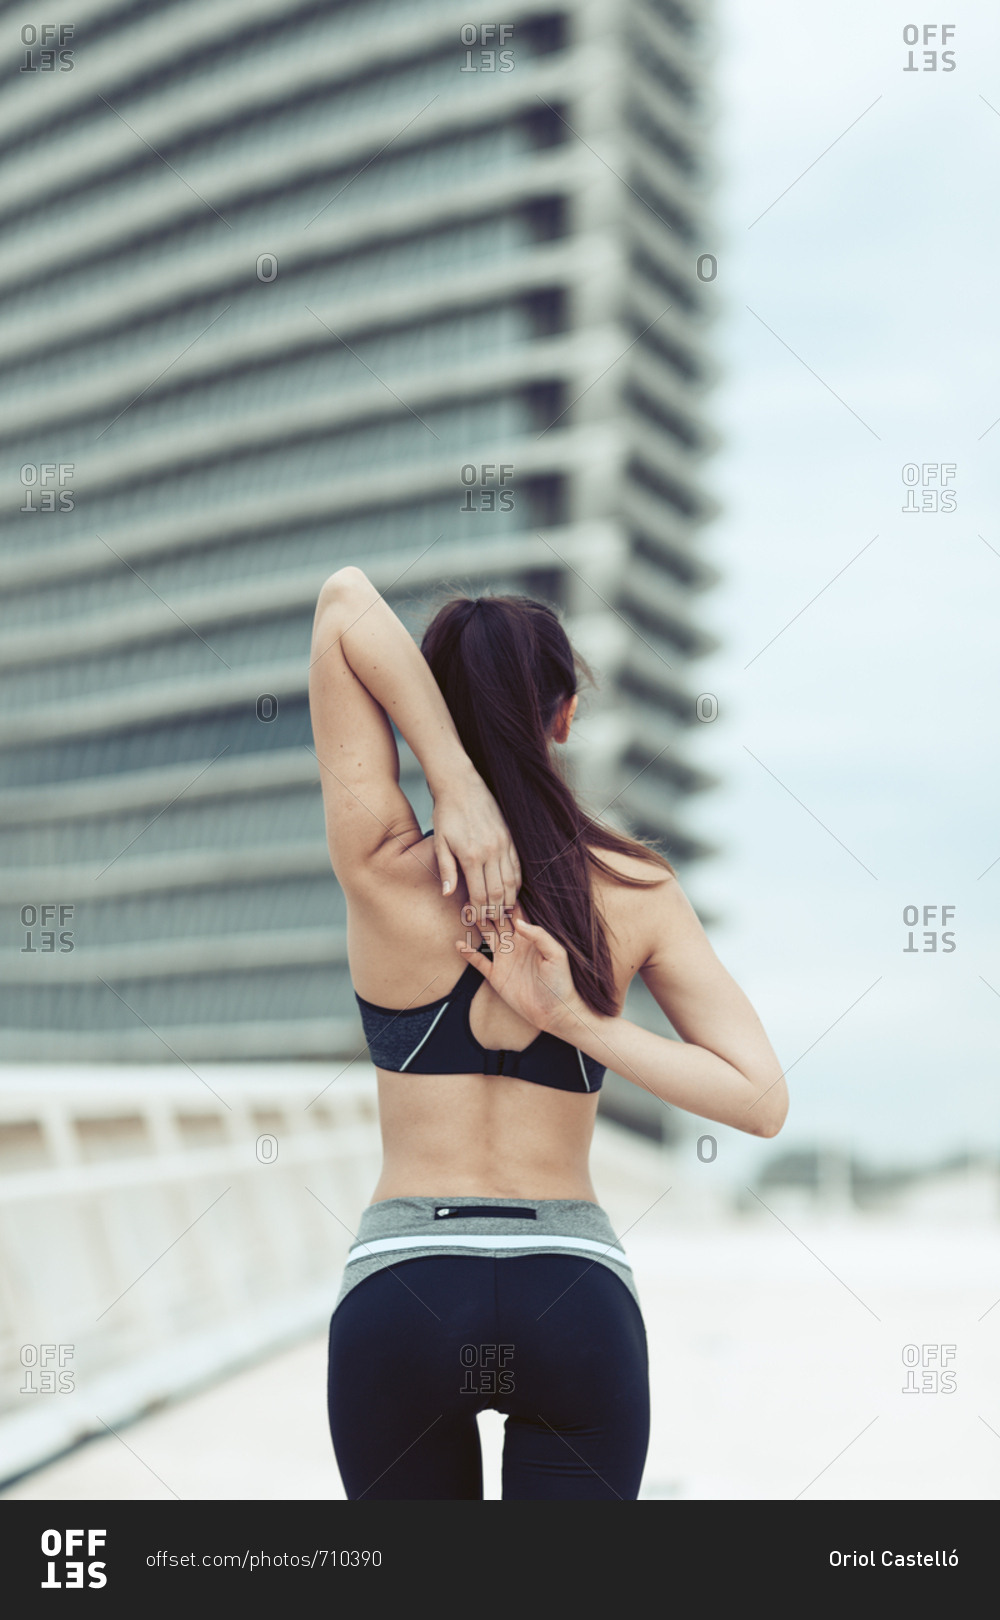 Rearview of athletic woman in sportswear linking fingers behind back